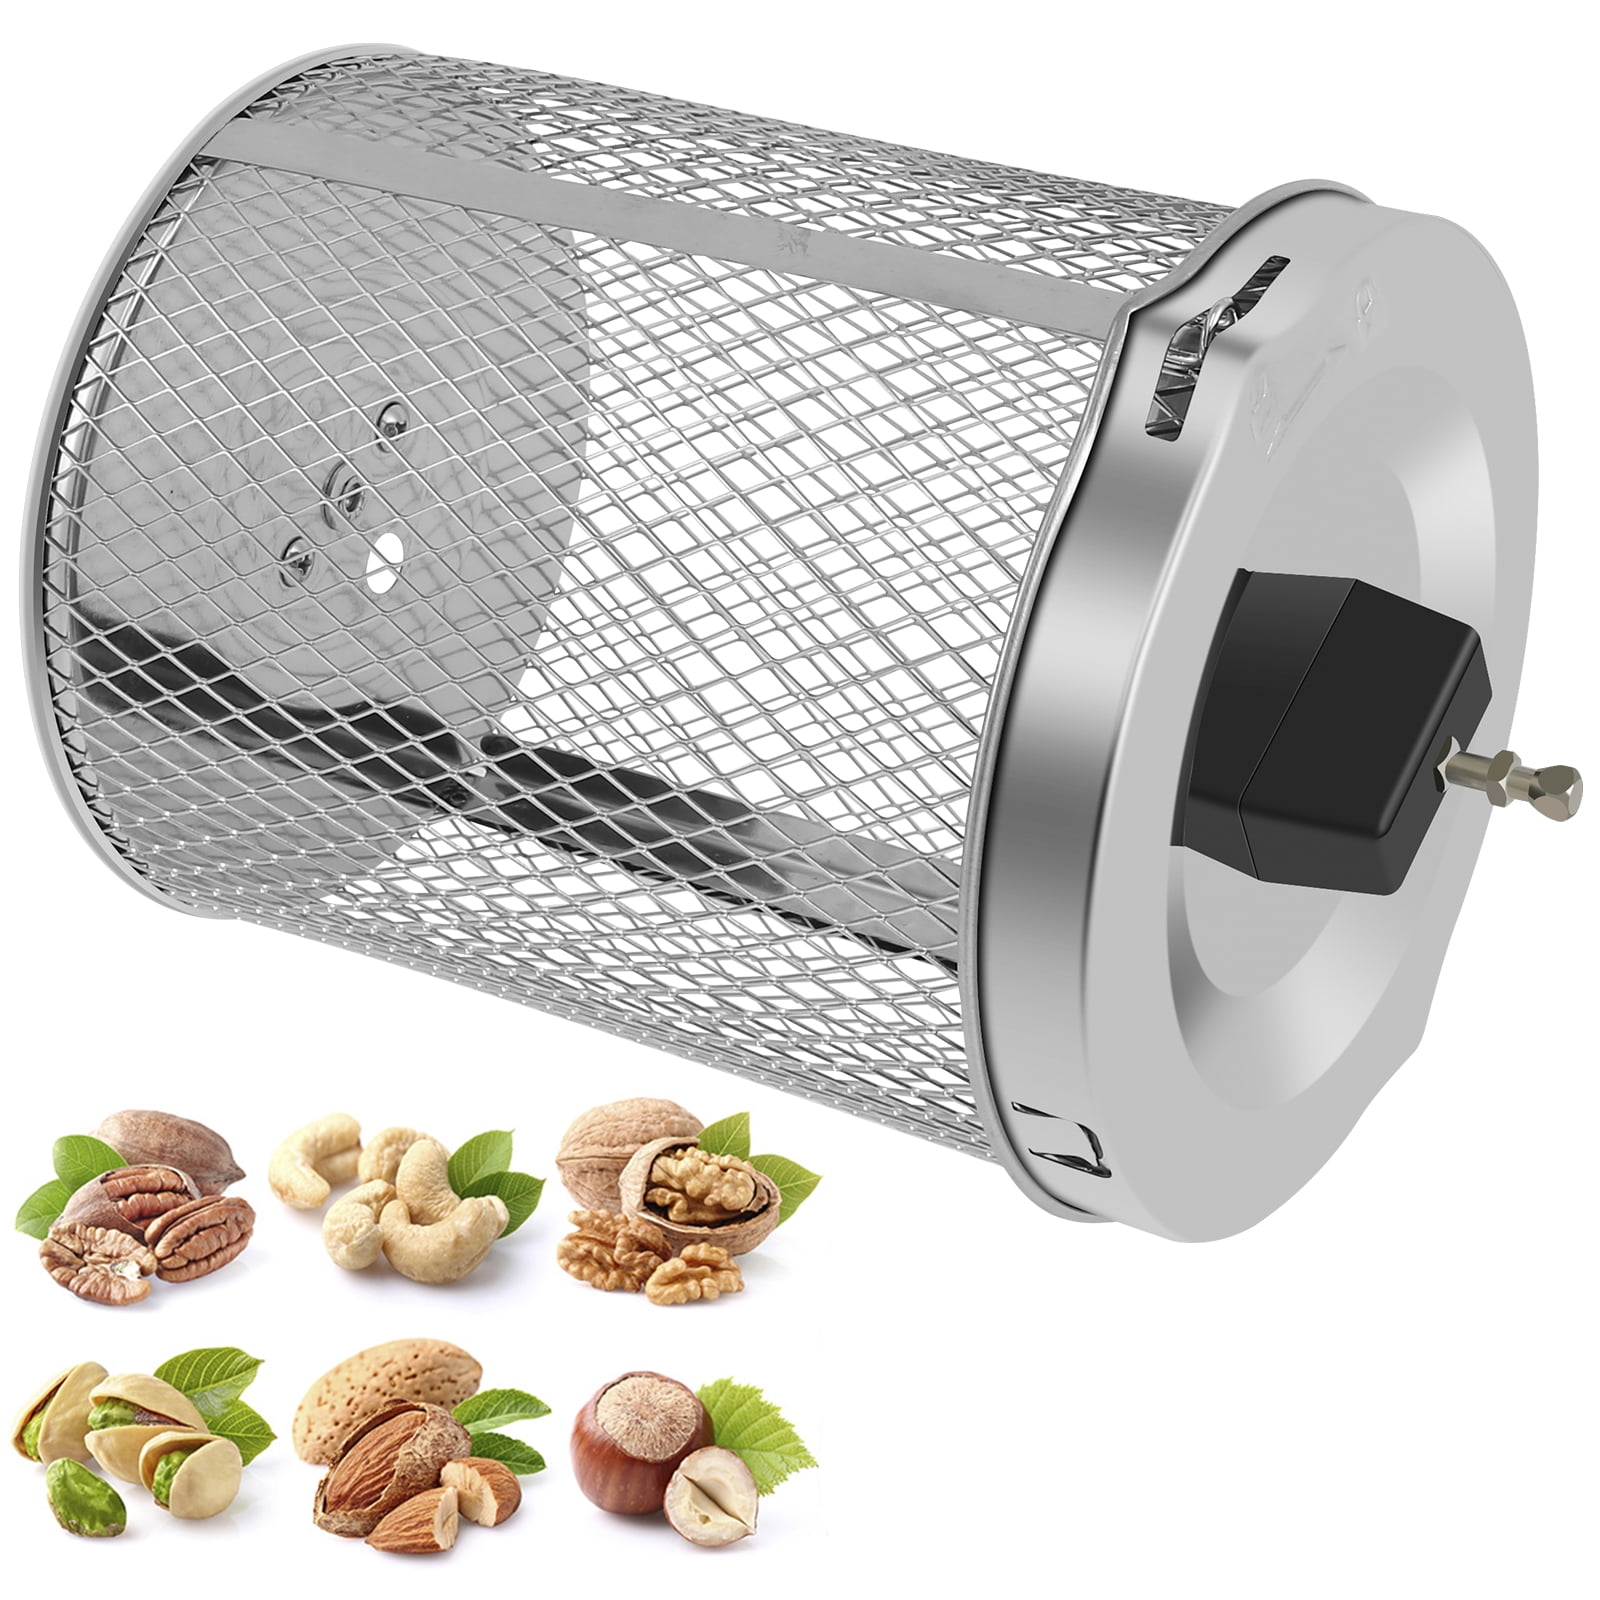 Grusce Rotisserie Grill Basket,Stainless Steel Cage,360° Rotating, BBQ Rolling Grill Basket,Bakeware Oven Roast Baking Nuts Beans Peanut Basket BBQ Grill Walmart.com